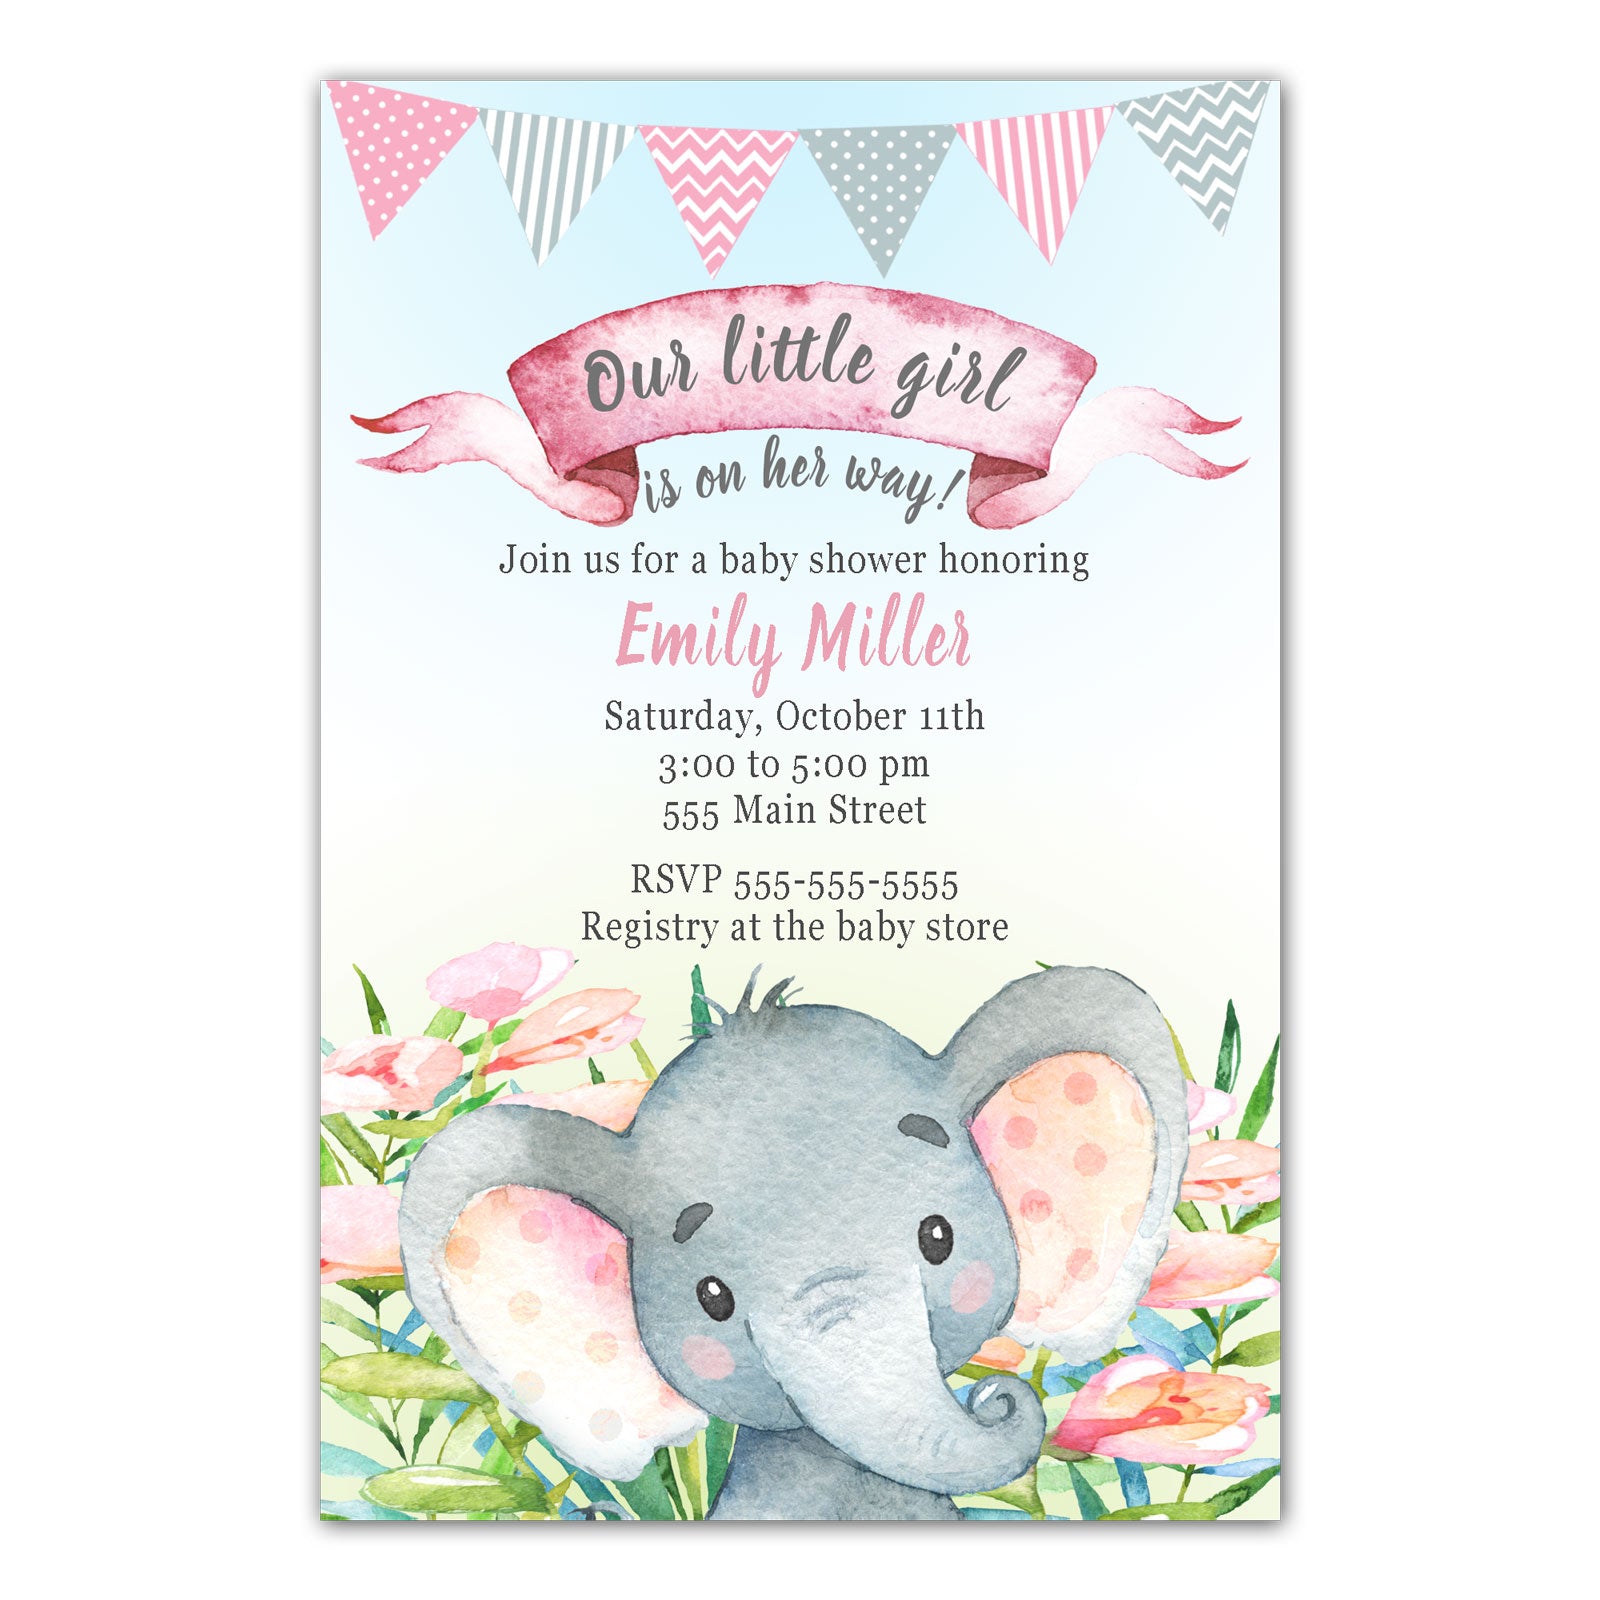 30 Elephant invitations watercolor painted girl baby shower 